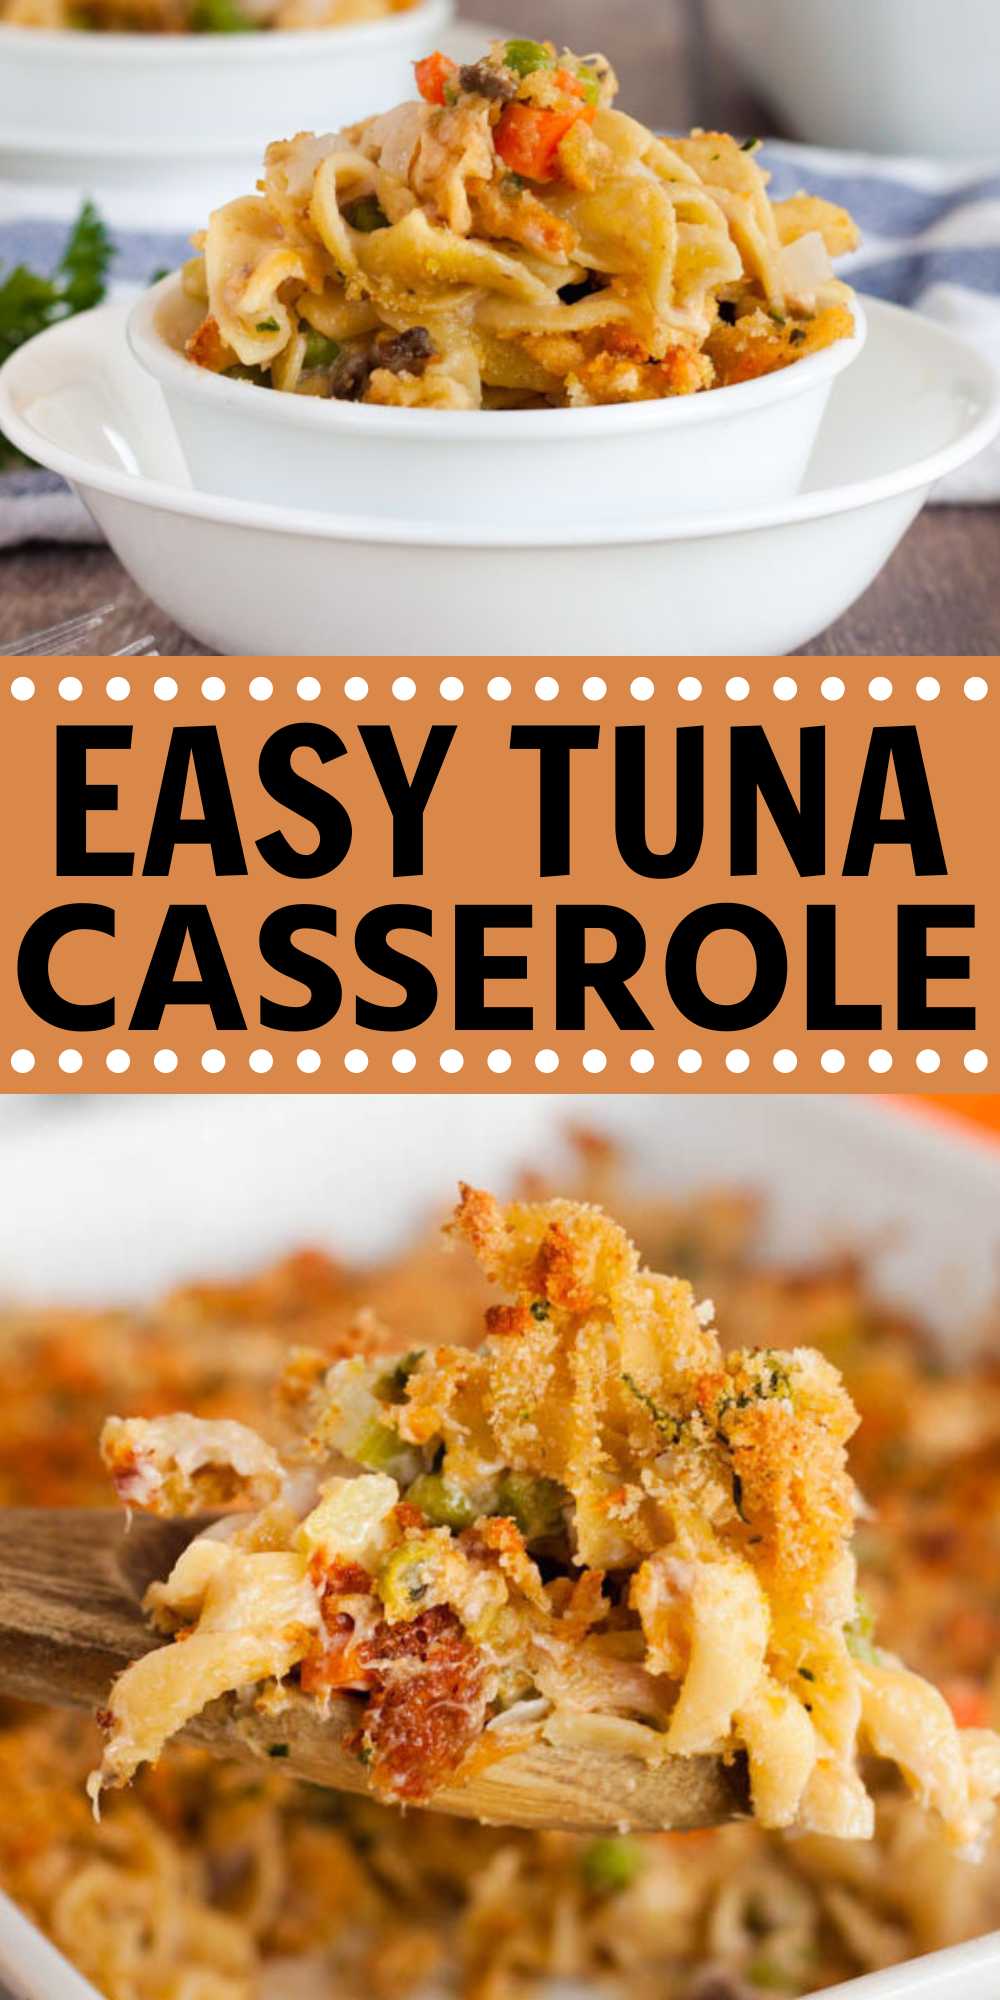 We love casseroles and this Easy Tuna Casserole Recipe does not disappoint. It is so creamy and the topping is crunchy and delicious. Casseroles do not have to be boring and this tuna noodle casserole is so tasty and delicious. The cream of mushroom soup makes the pasta mixture so creamy and the best comfort food in each bite. #eatingonadime #tunacasserole #simpletunacasserole